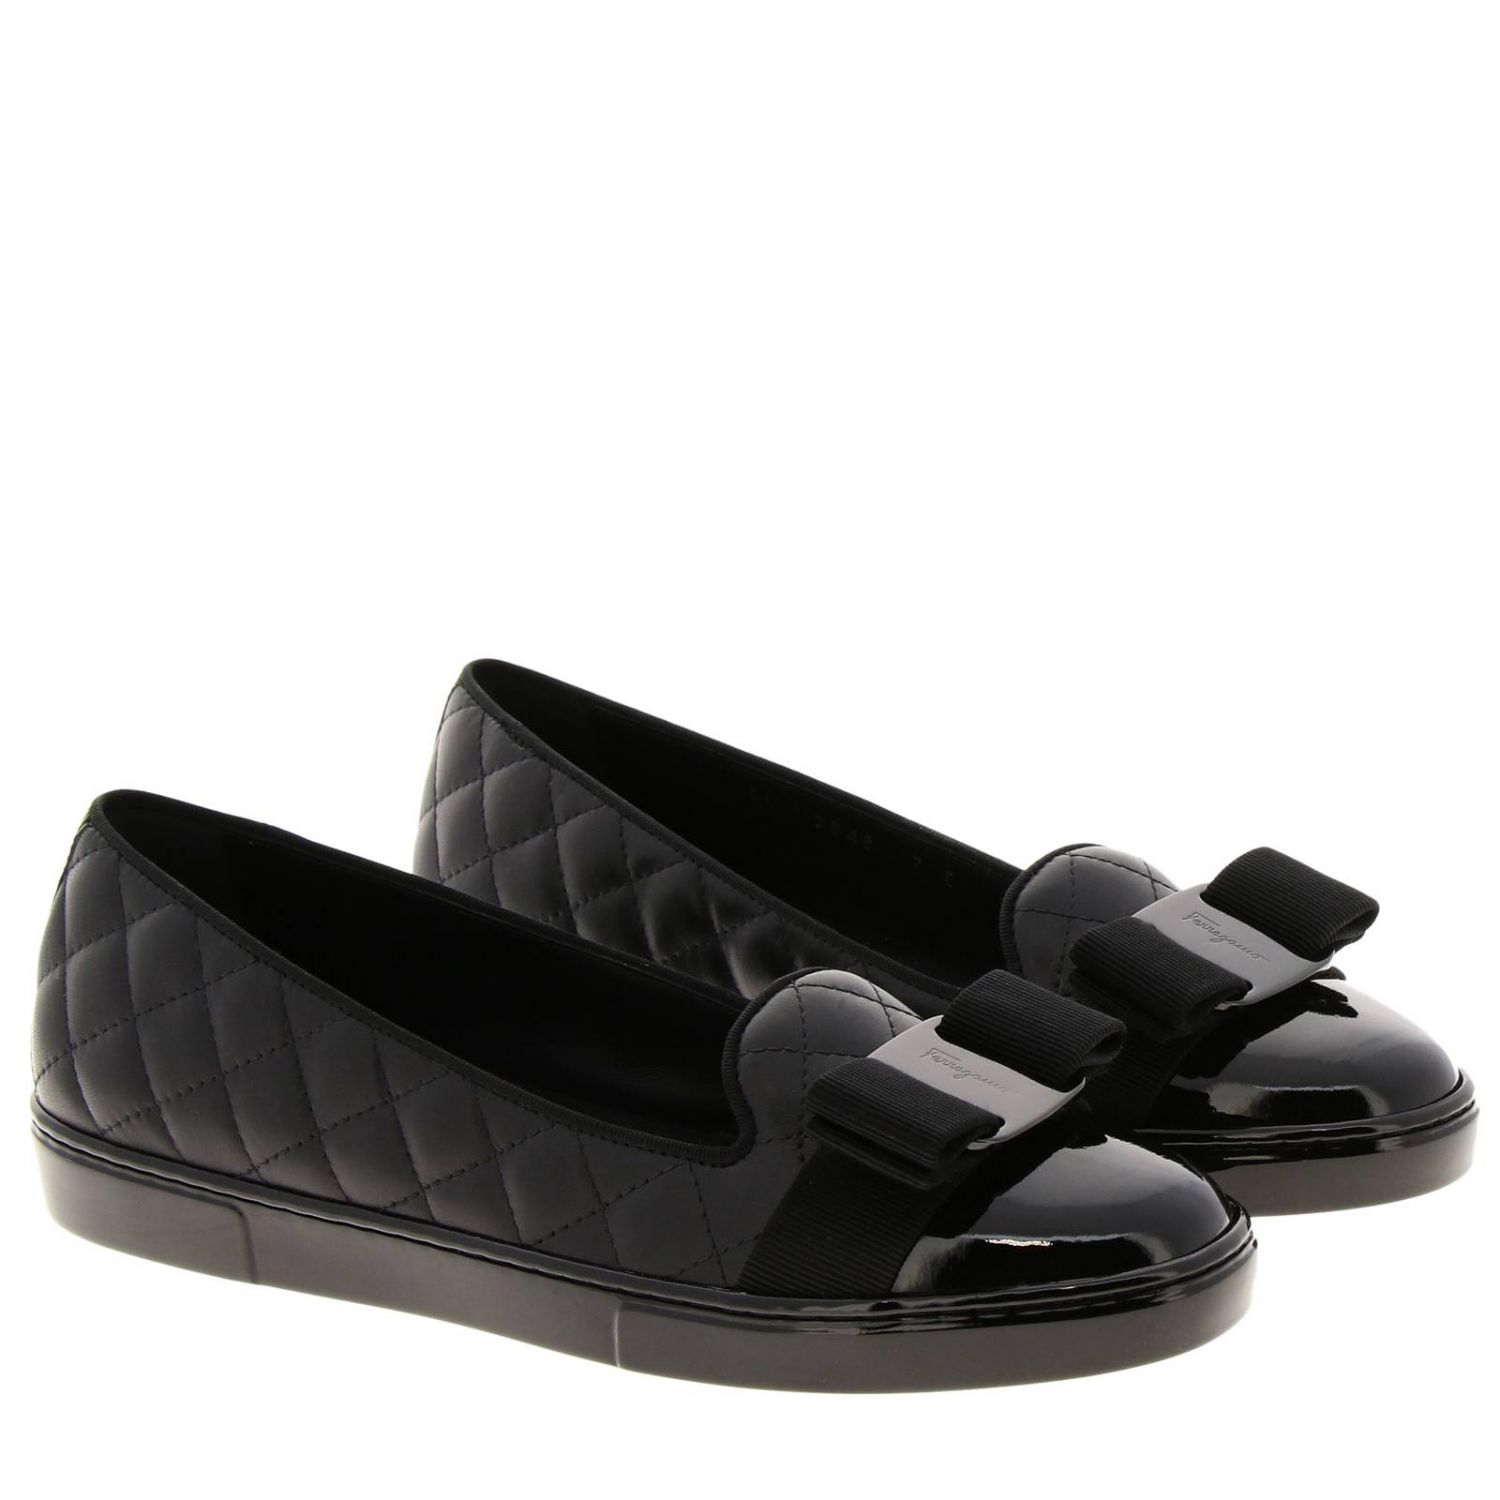 Salvatore Ferragamo Outlet: Lady q ballet flats in quilted leather with ...